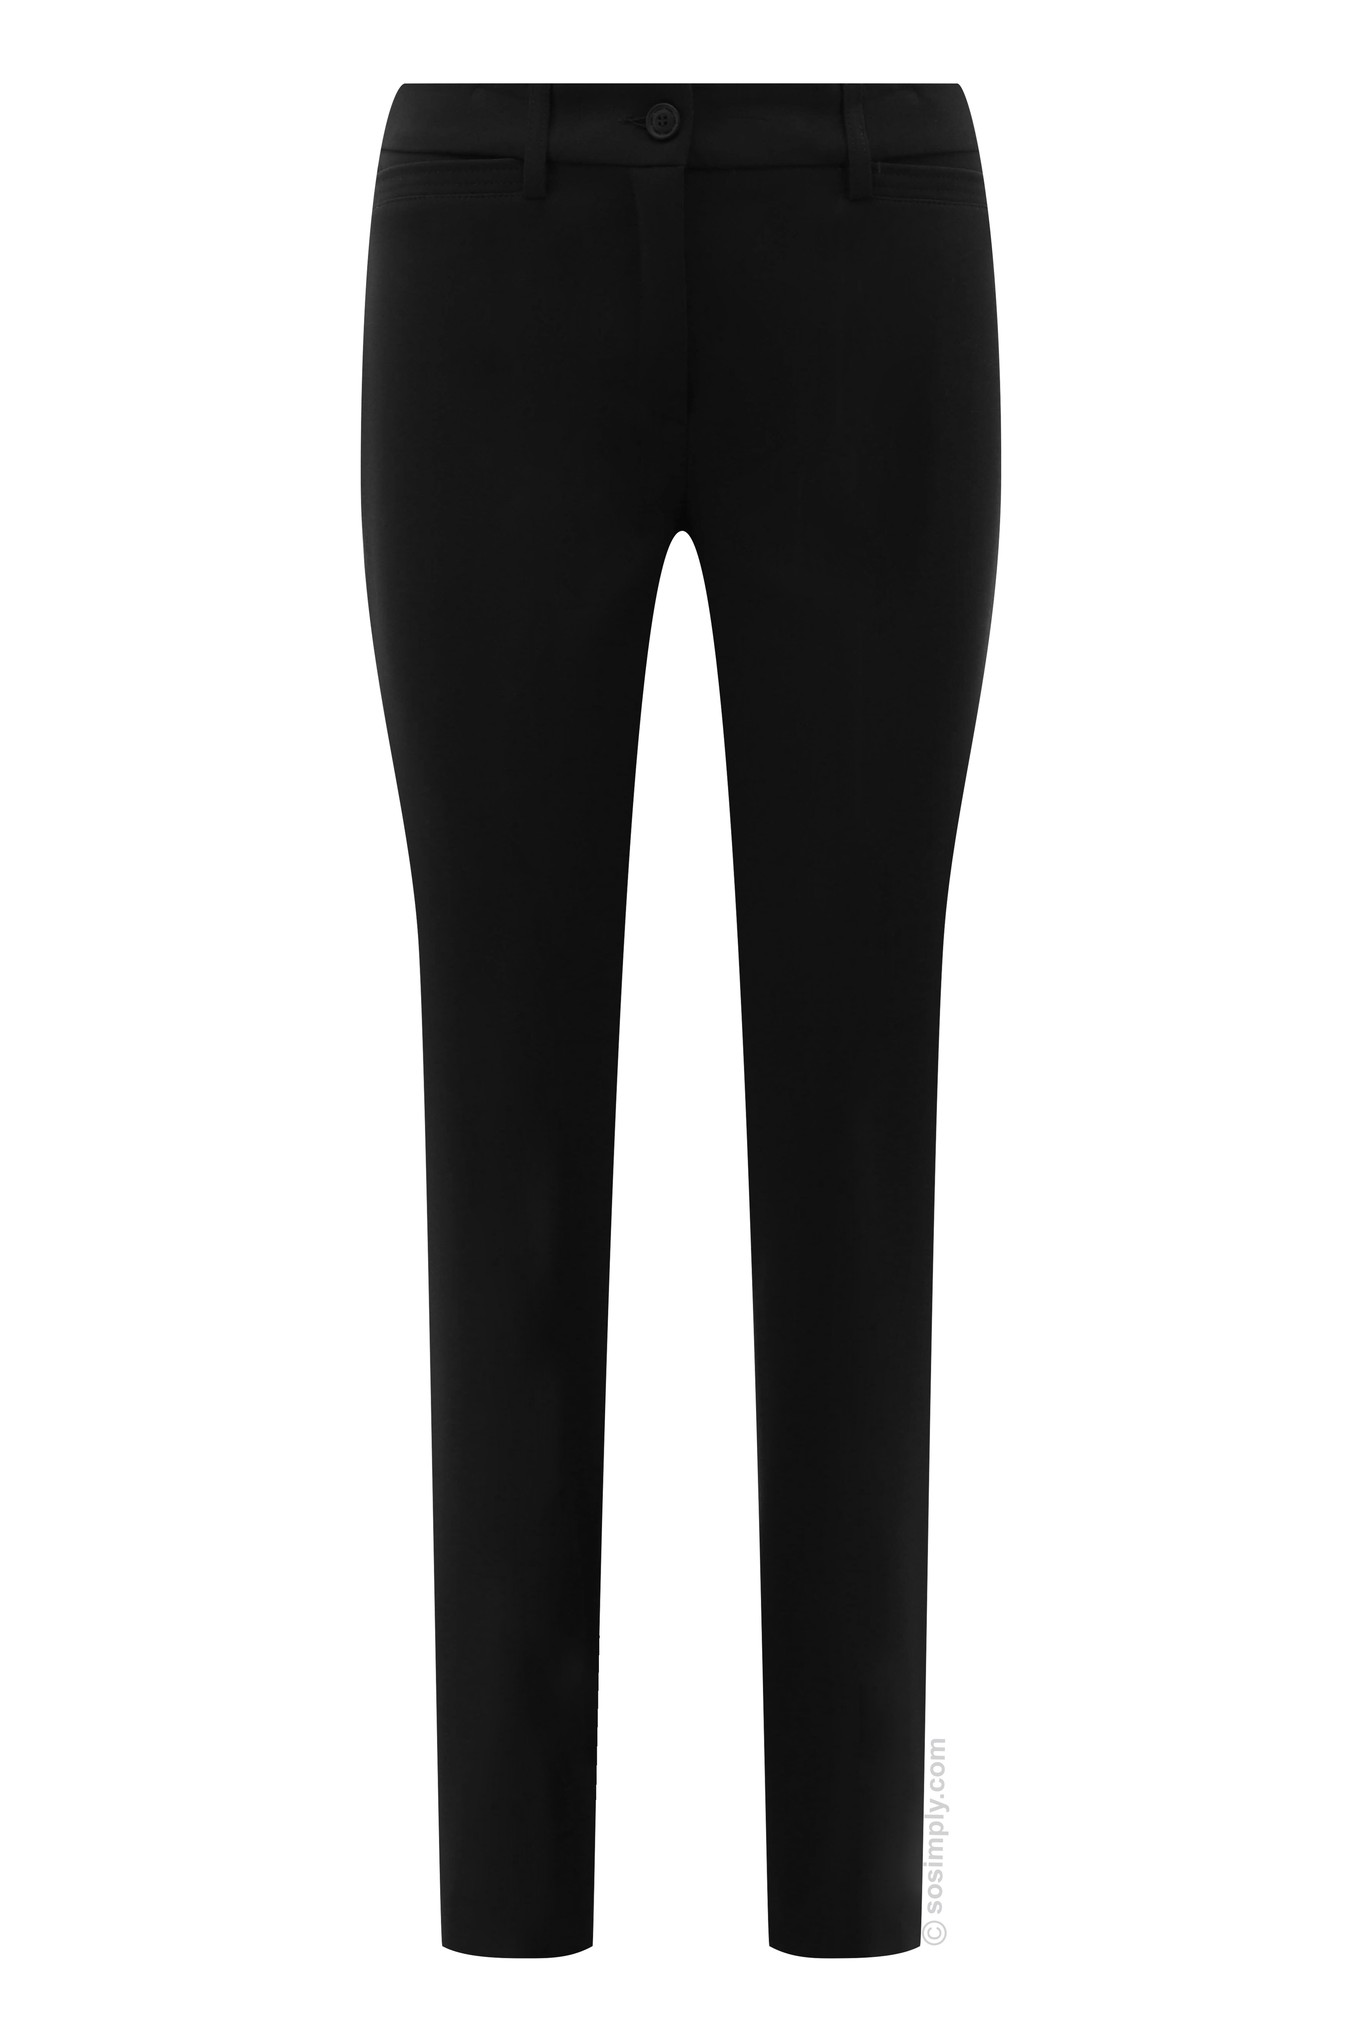 Robell Sissi Trousers - So Simply